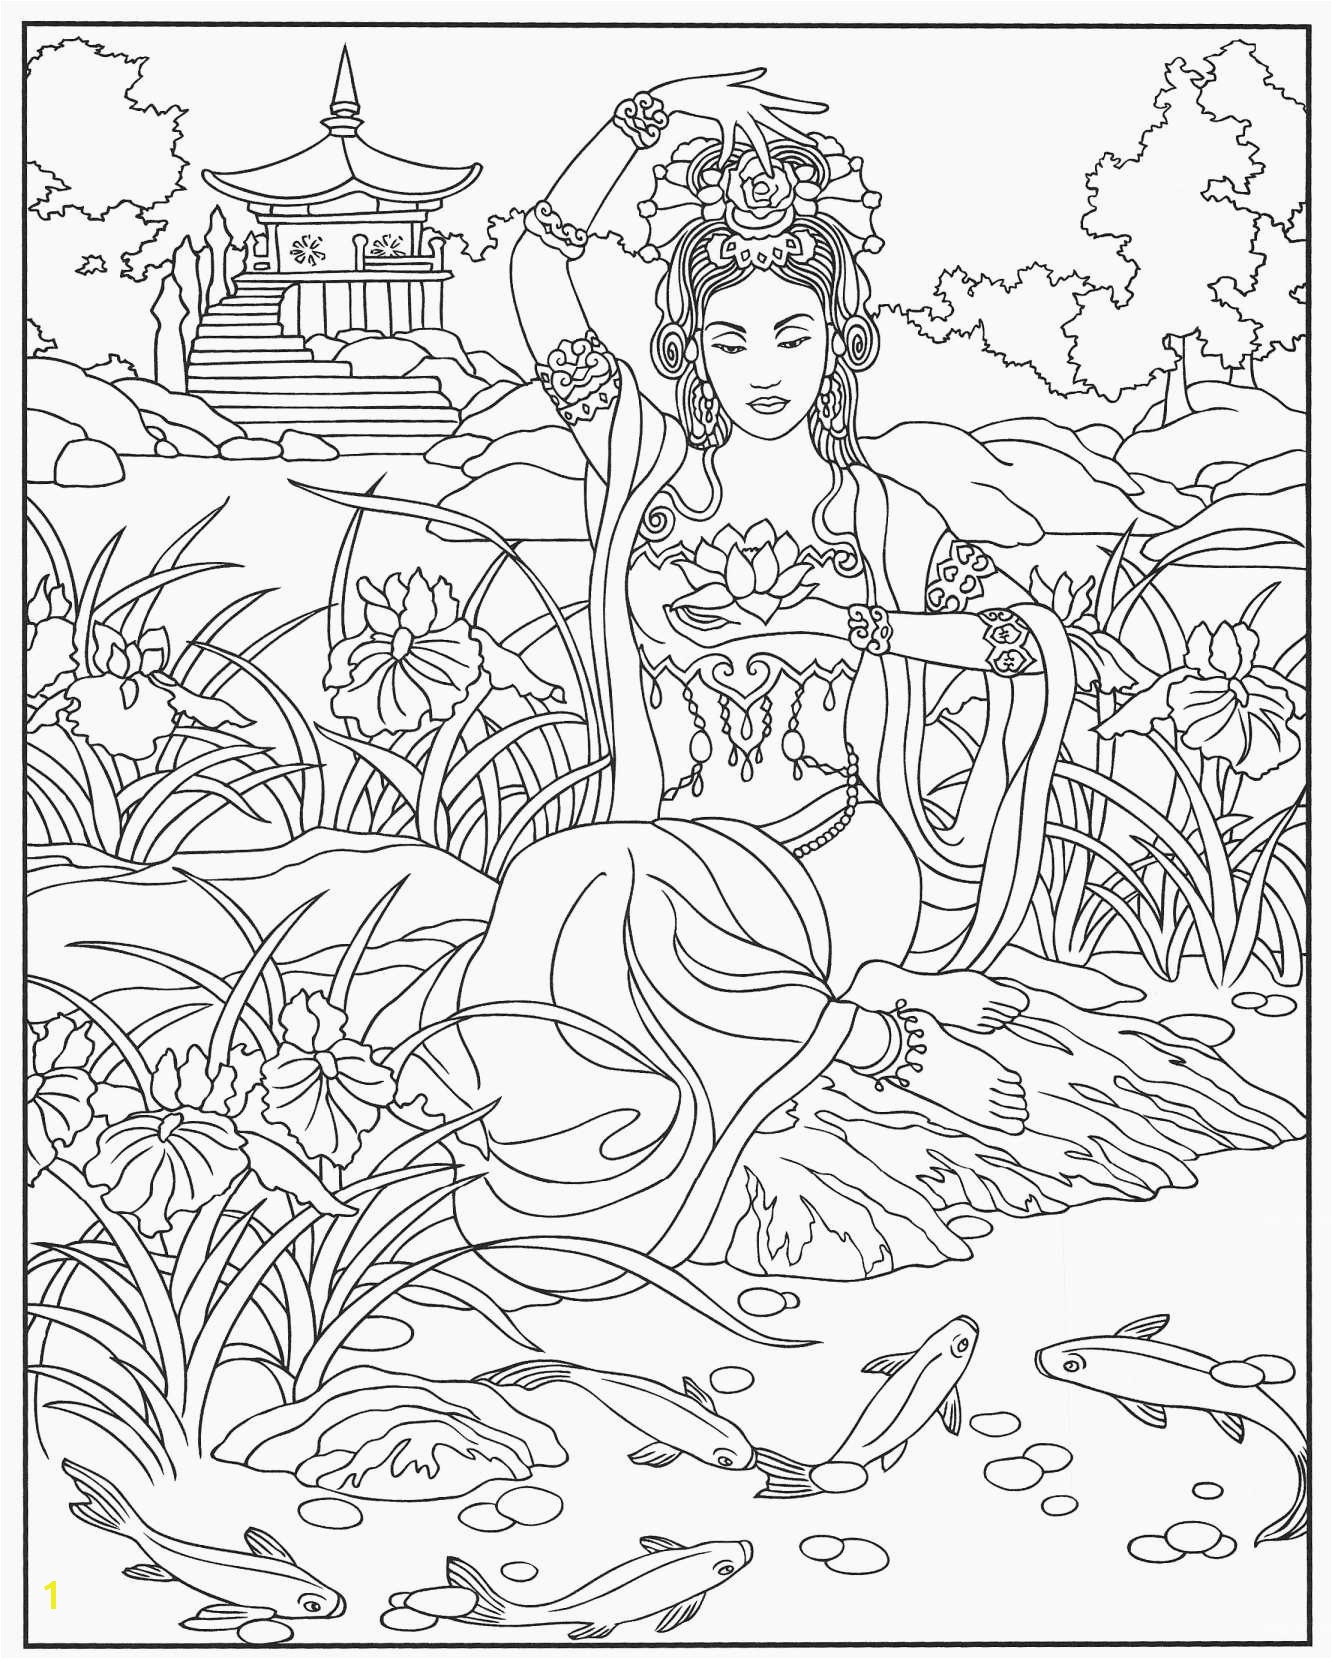 Christmas Angel Coloring Pages Luxury Coloring Pages Angels Printable Katesgrove